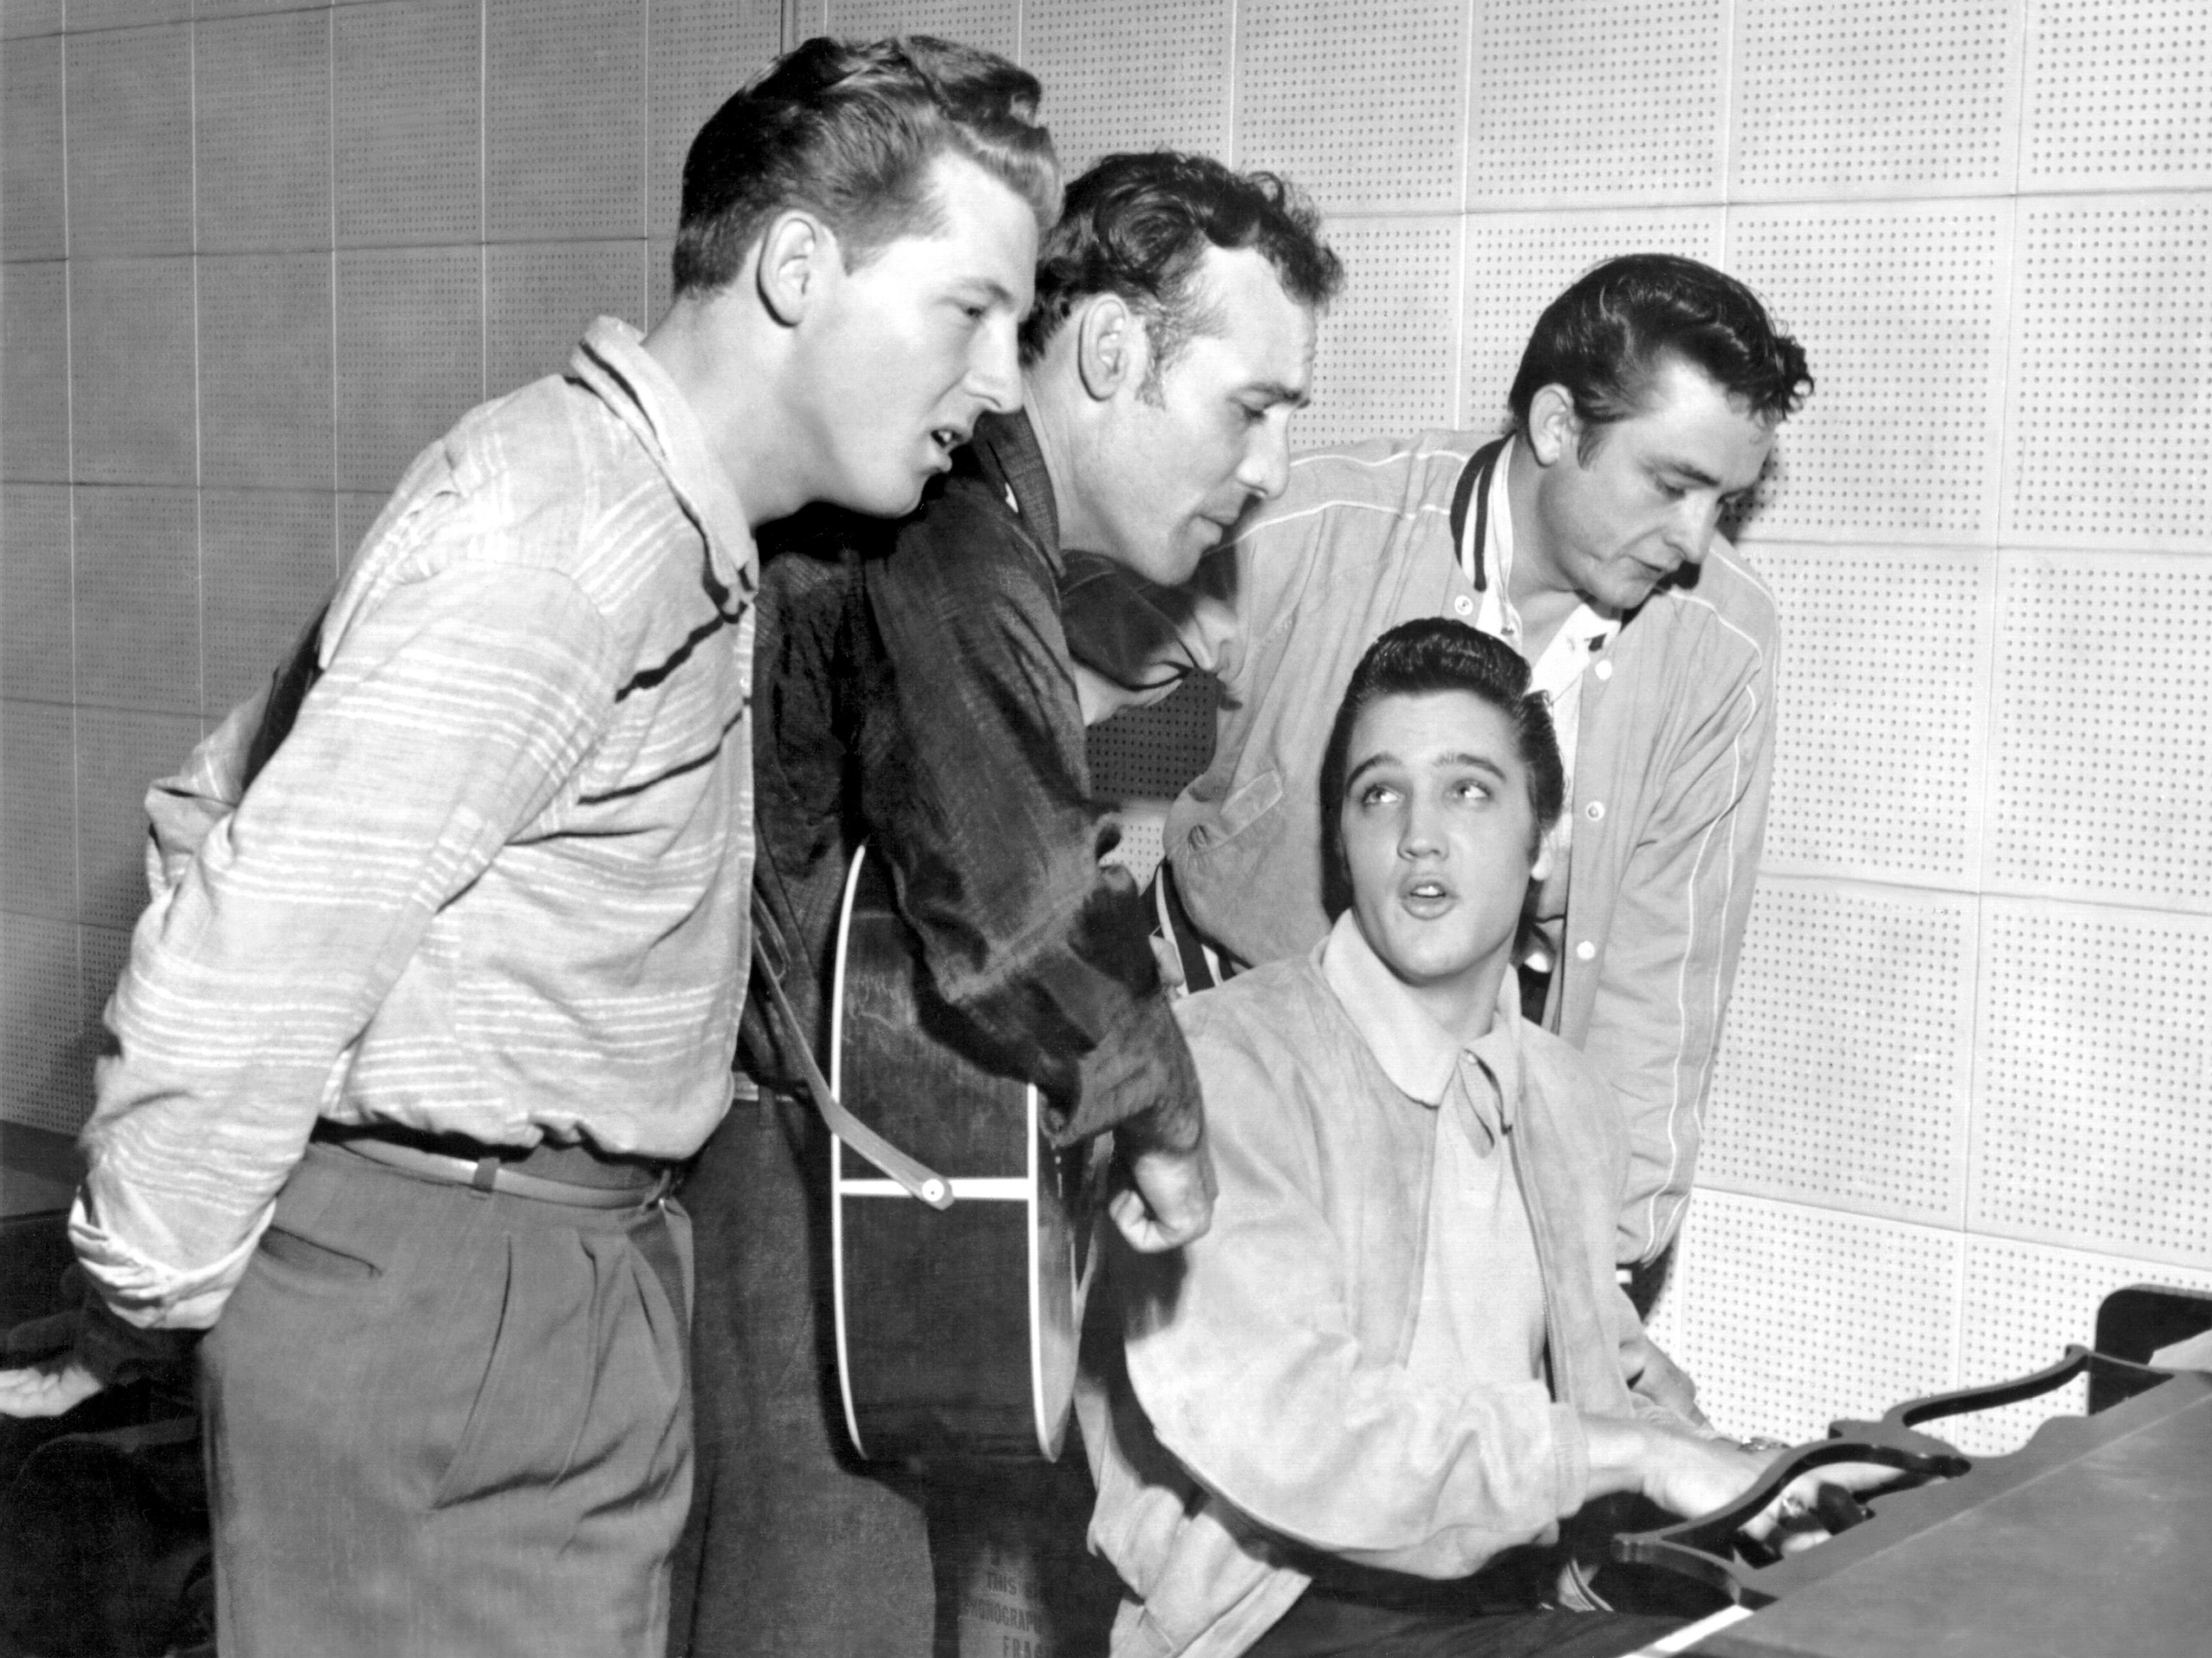 Jerry Lee Lewis, Carl Perkins, Elvis Presley. and Johnny Cash near a piano